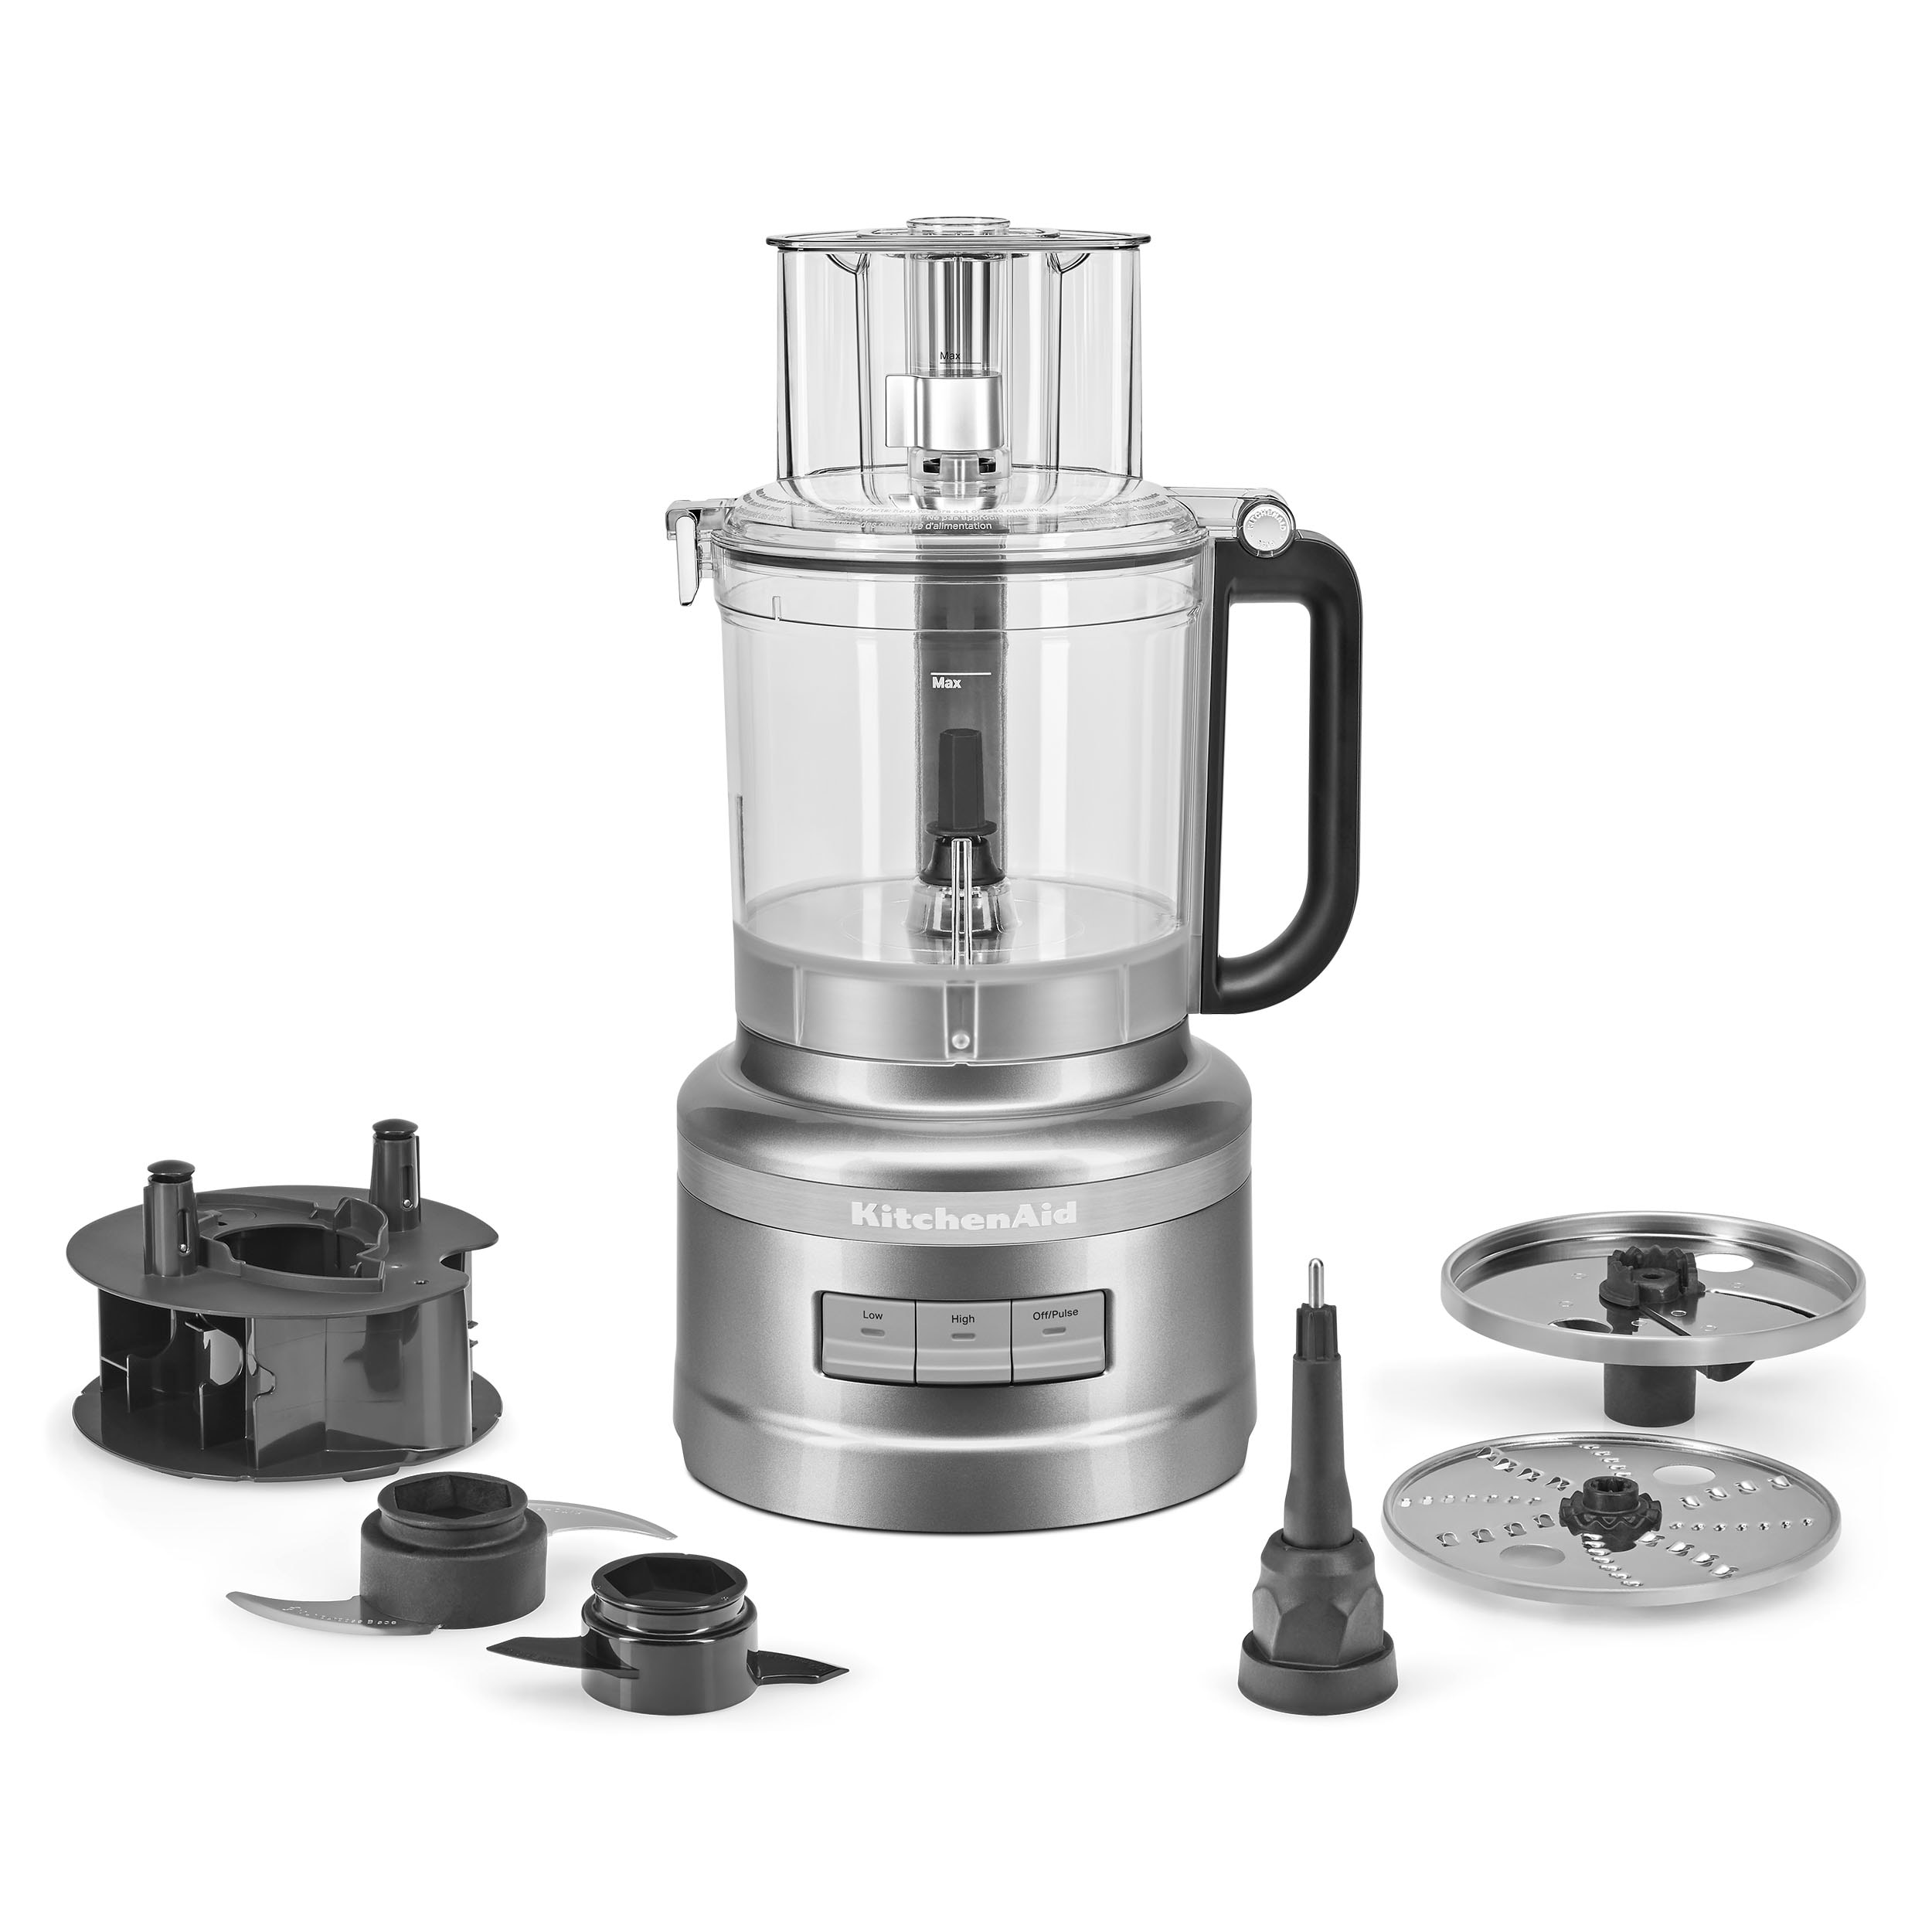 nutribullet NBP50100 Food Processor 450-Watts with 7-Cup Capacity and  Stainless Steel Slice, Shred, Chop and Dough Attachments, Black